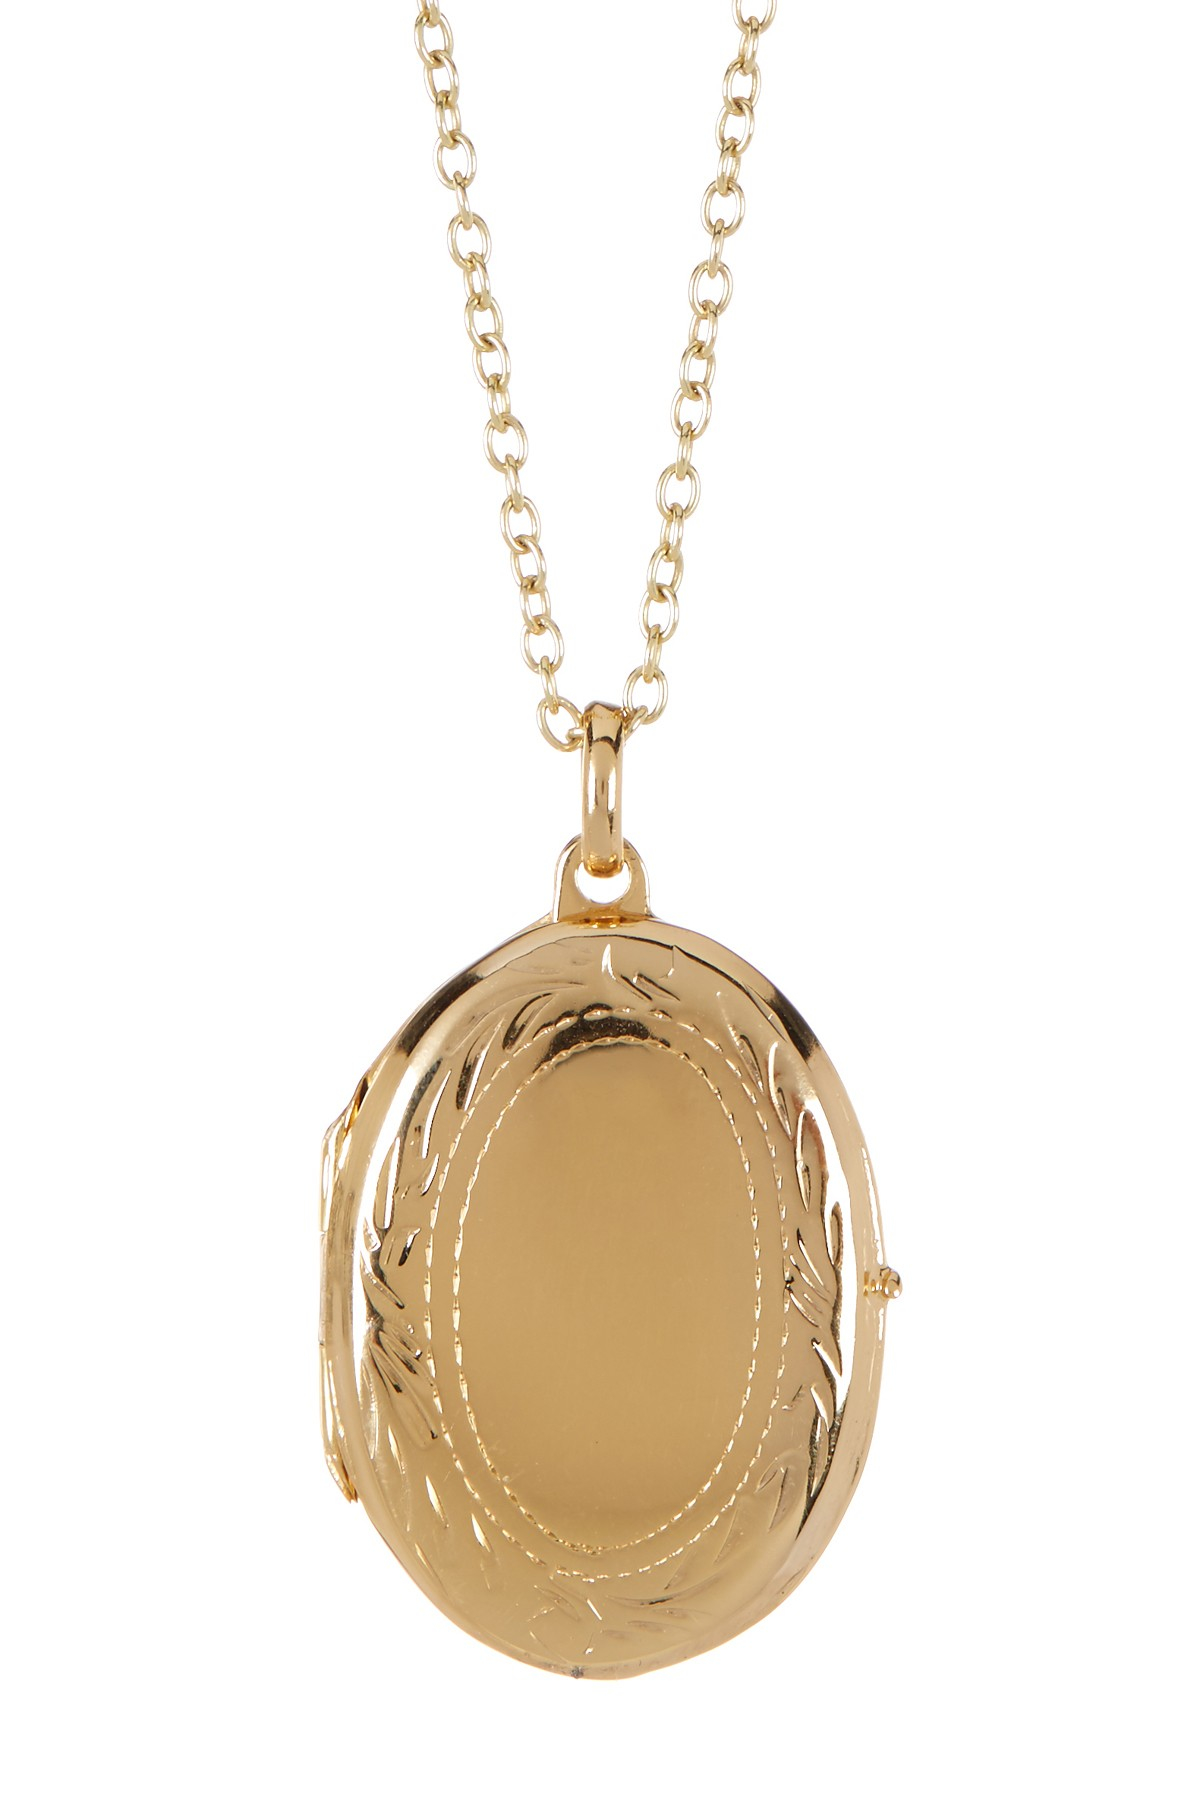 Gold Plated Necklace With Pendant Images